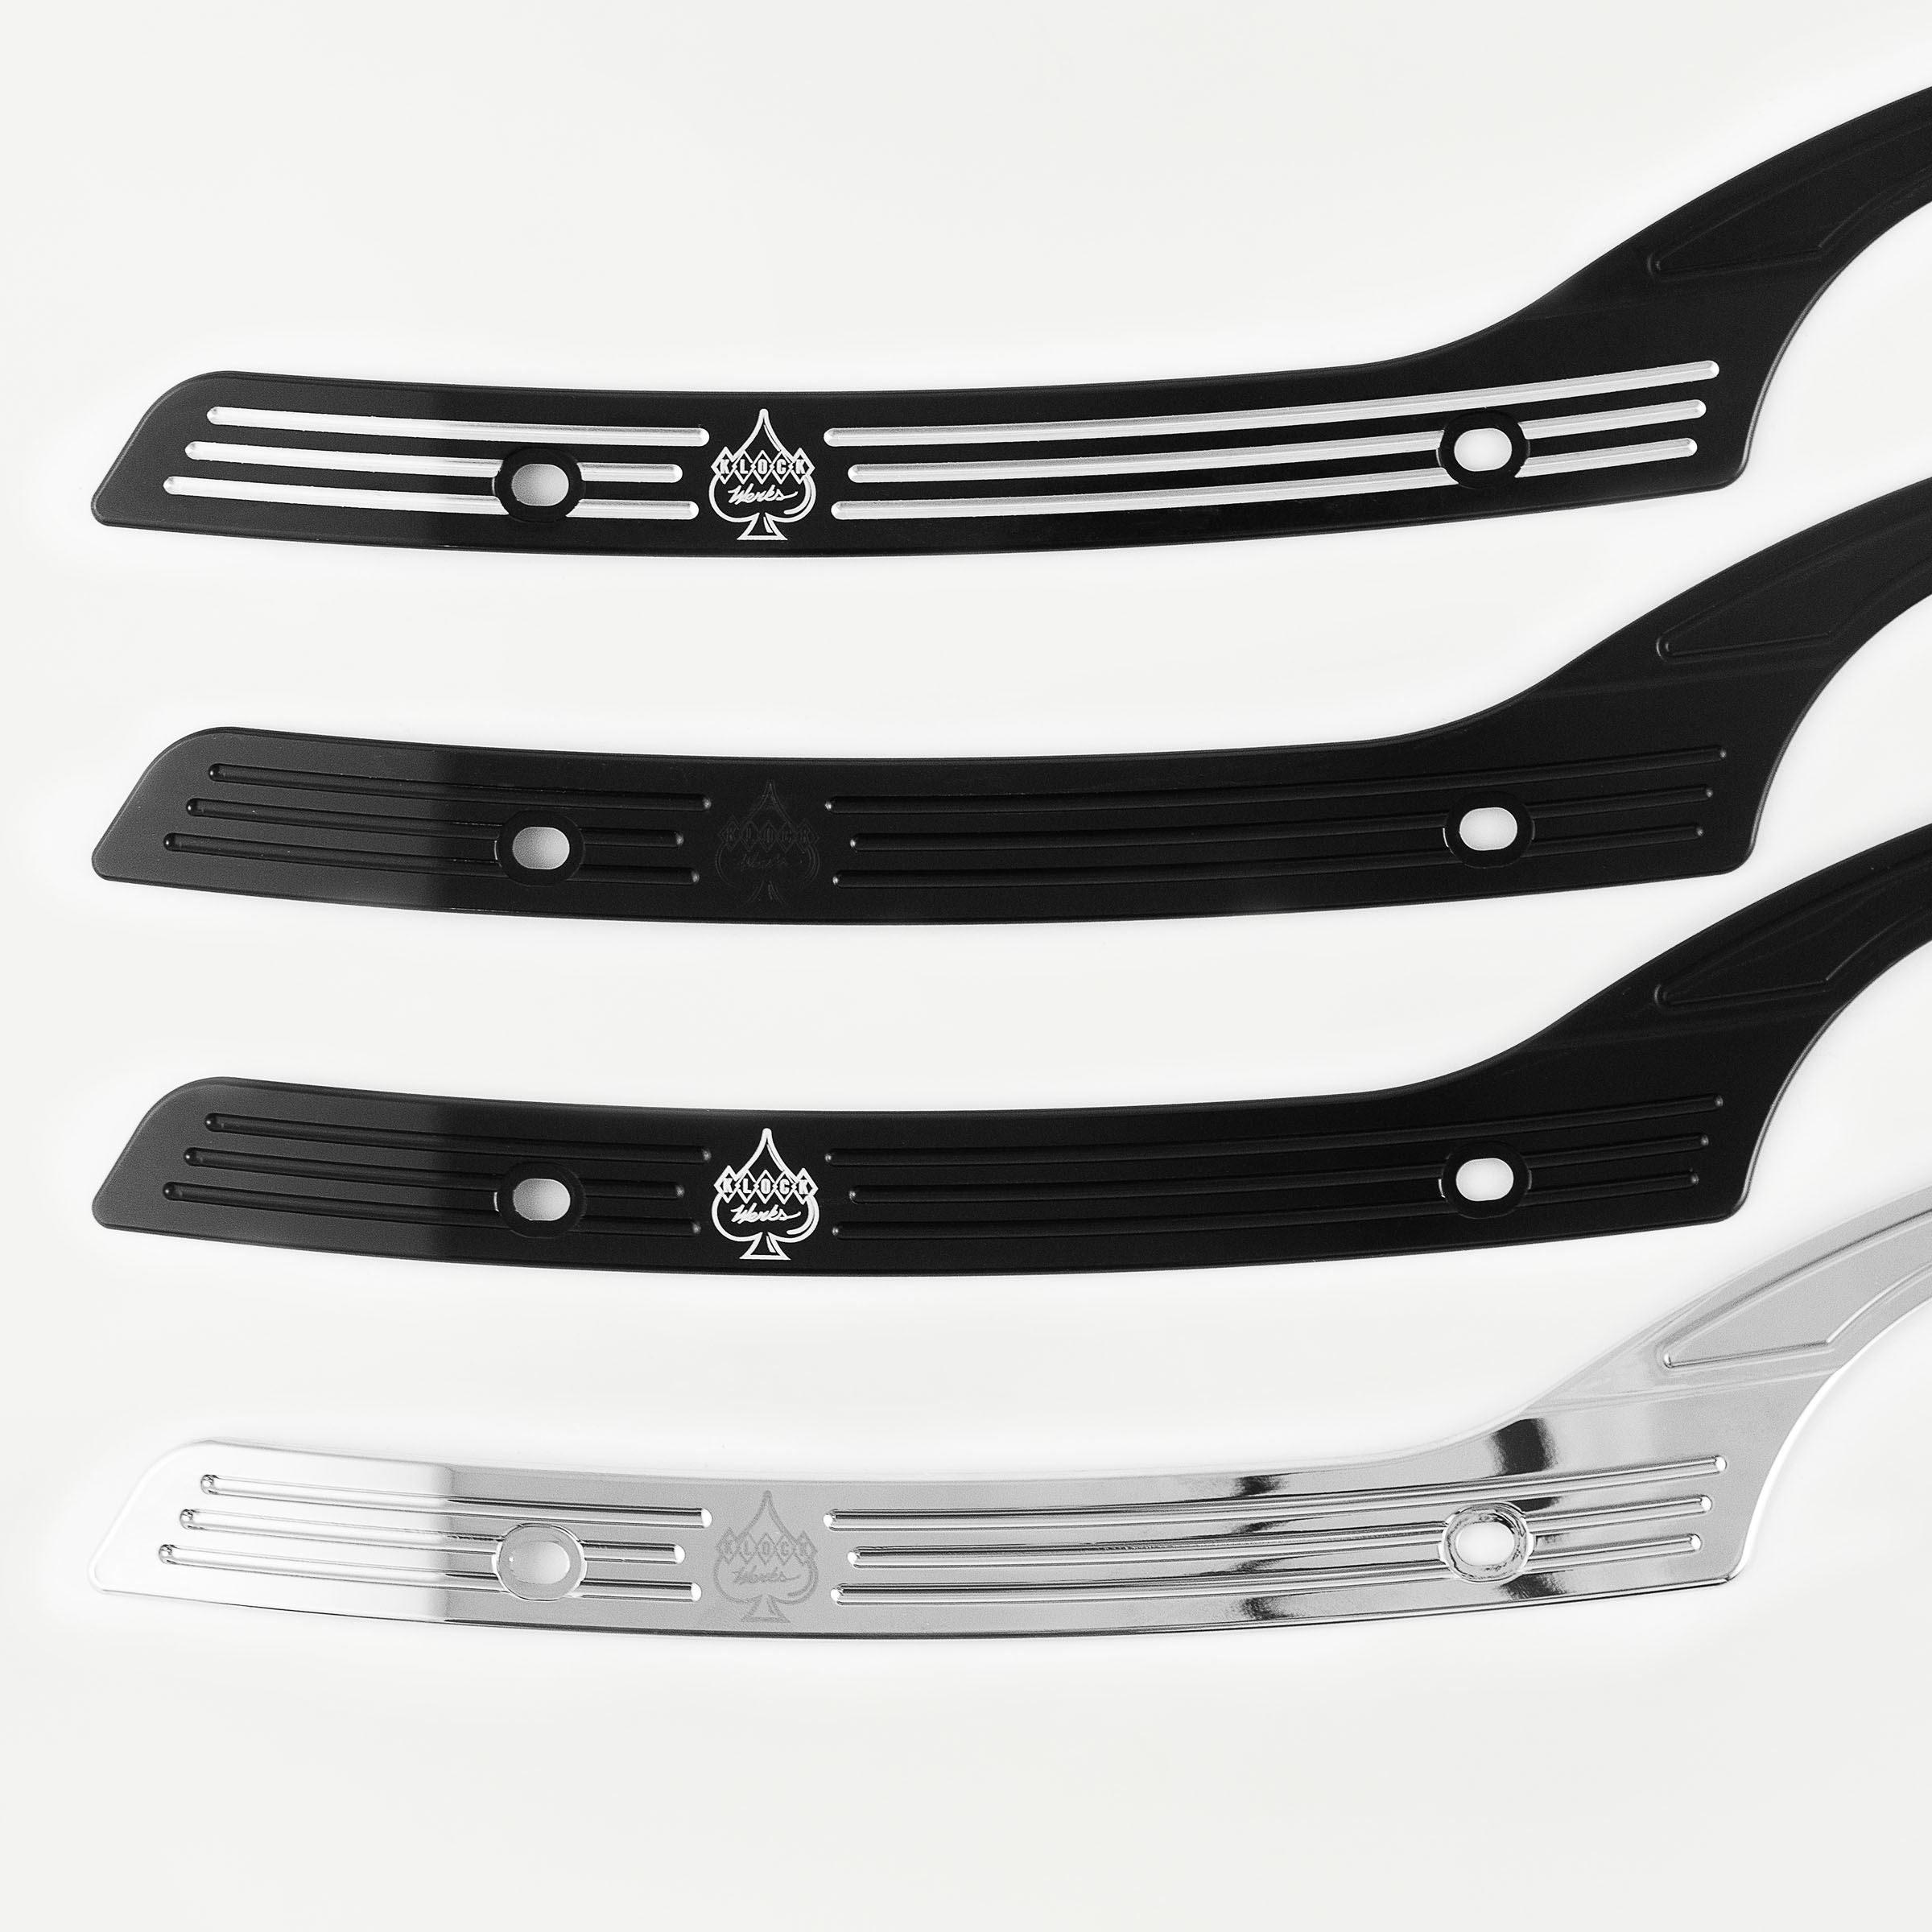 Windshield Trim for 2015-2024 Harley-Davidson Road Glide(Shown in order from top to bottom: Black Contrast, Black Out, Black w/Contrast Logo, Chrome)